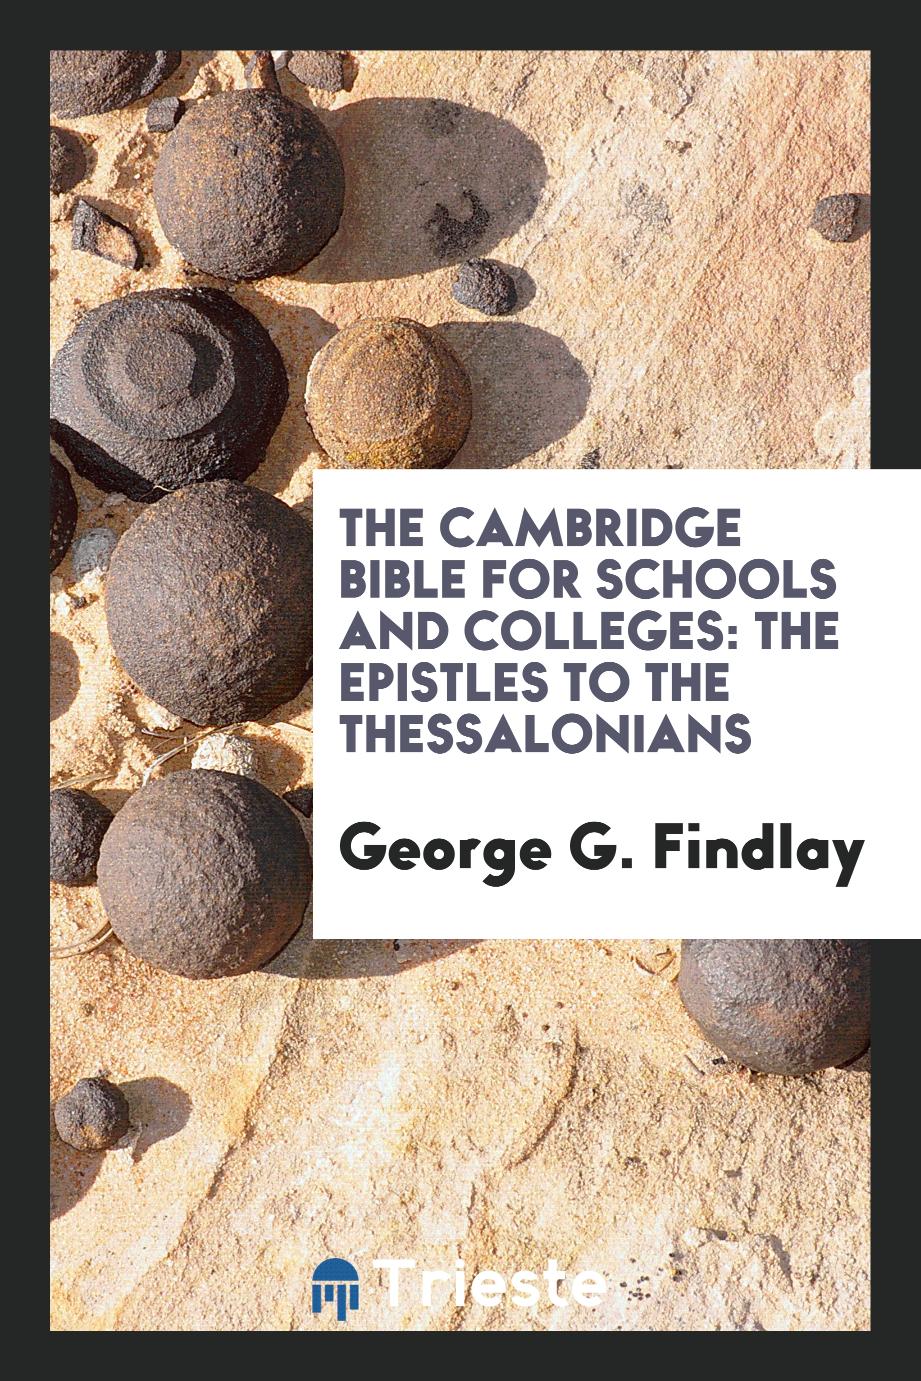 The Cambridge Bible for Schools and Colleges: The Epistles to the Thessalonians